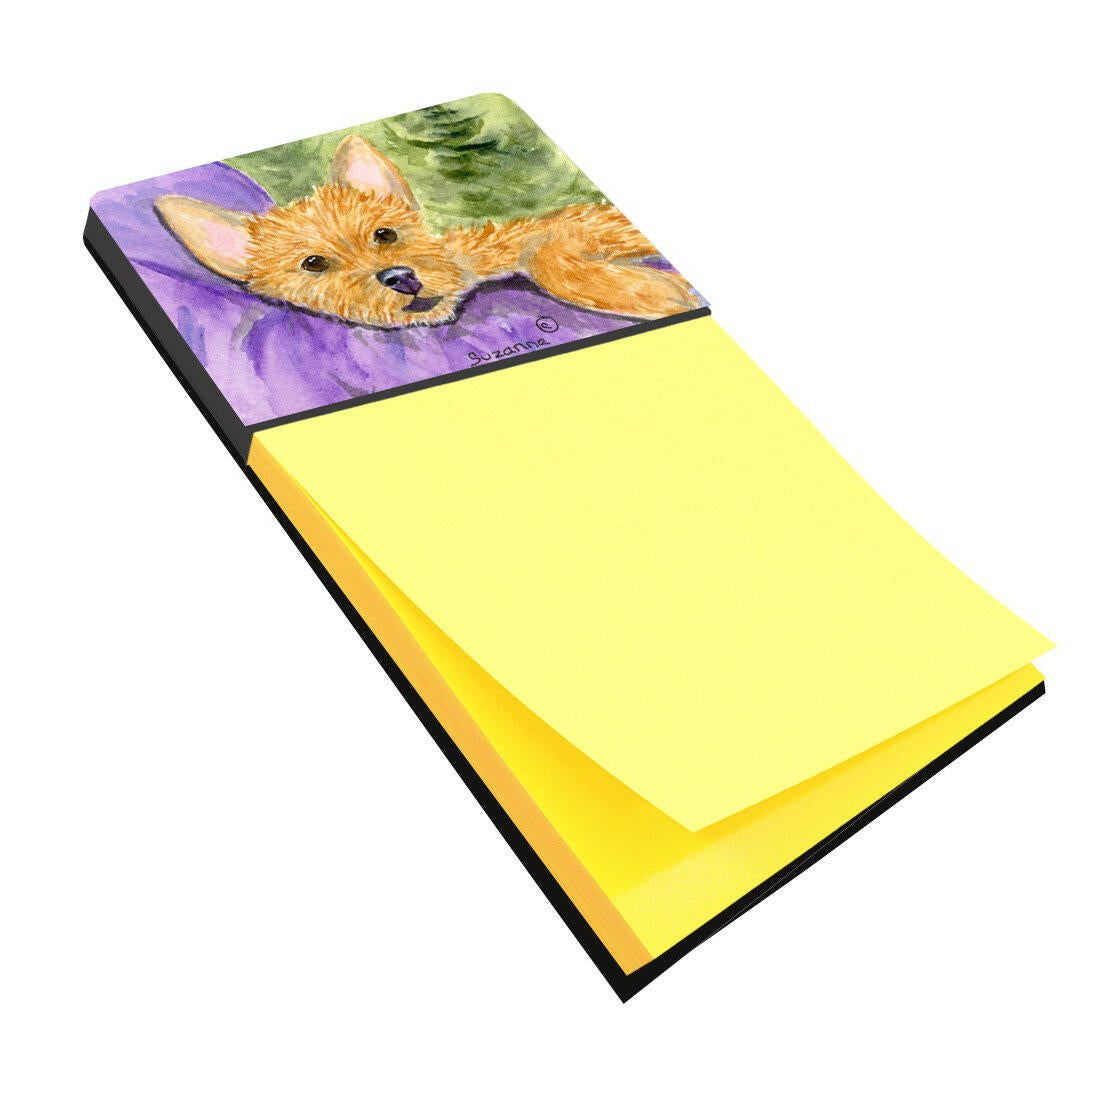 Norwich Terrier Refiillable Sticky Note Holder or Postit Note Dispenser SS8898SN by Caroline's Treasures